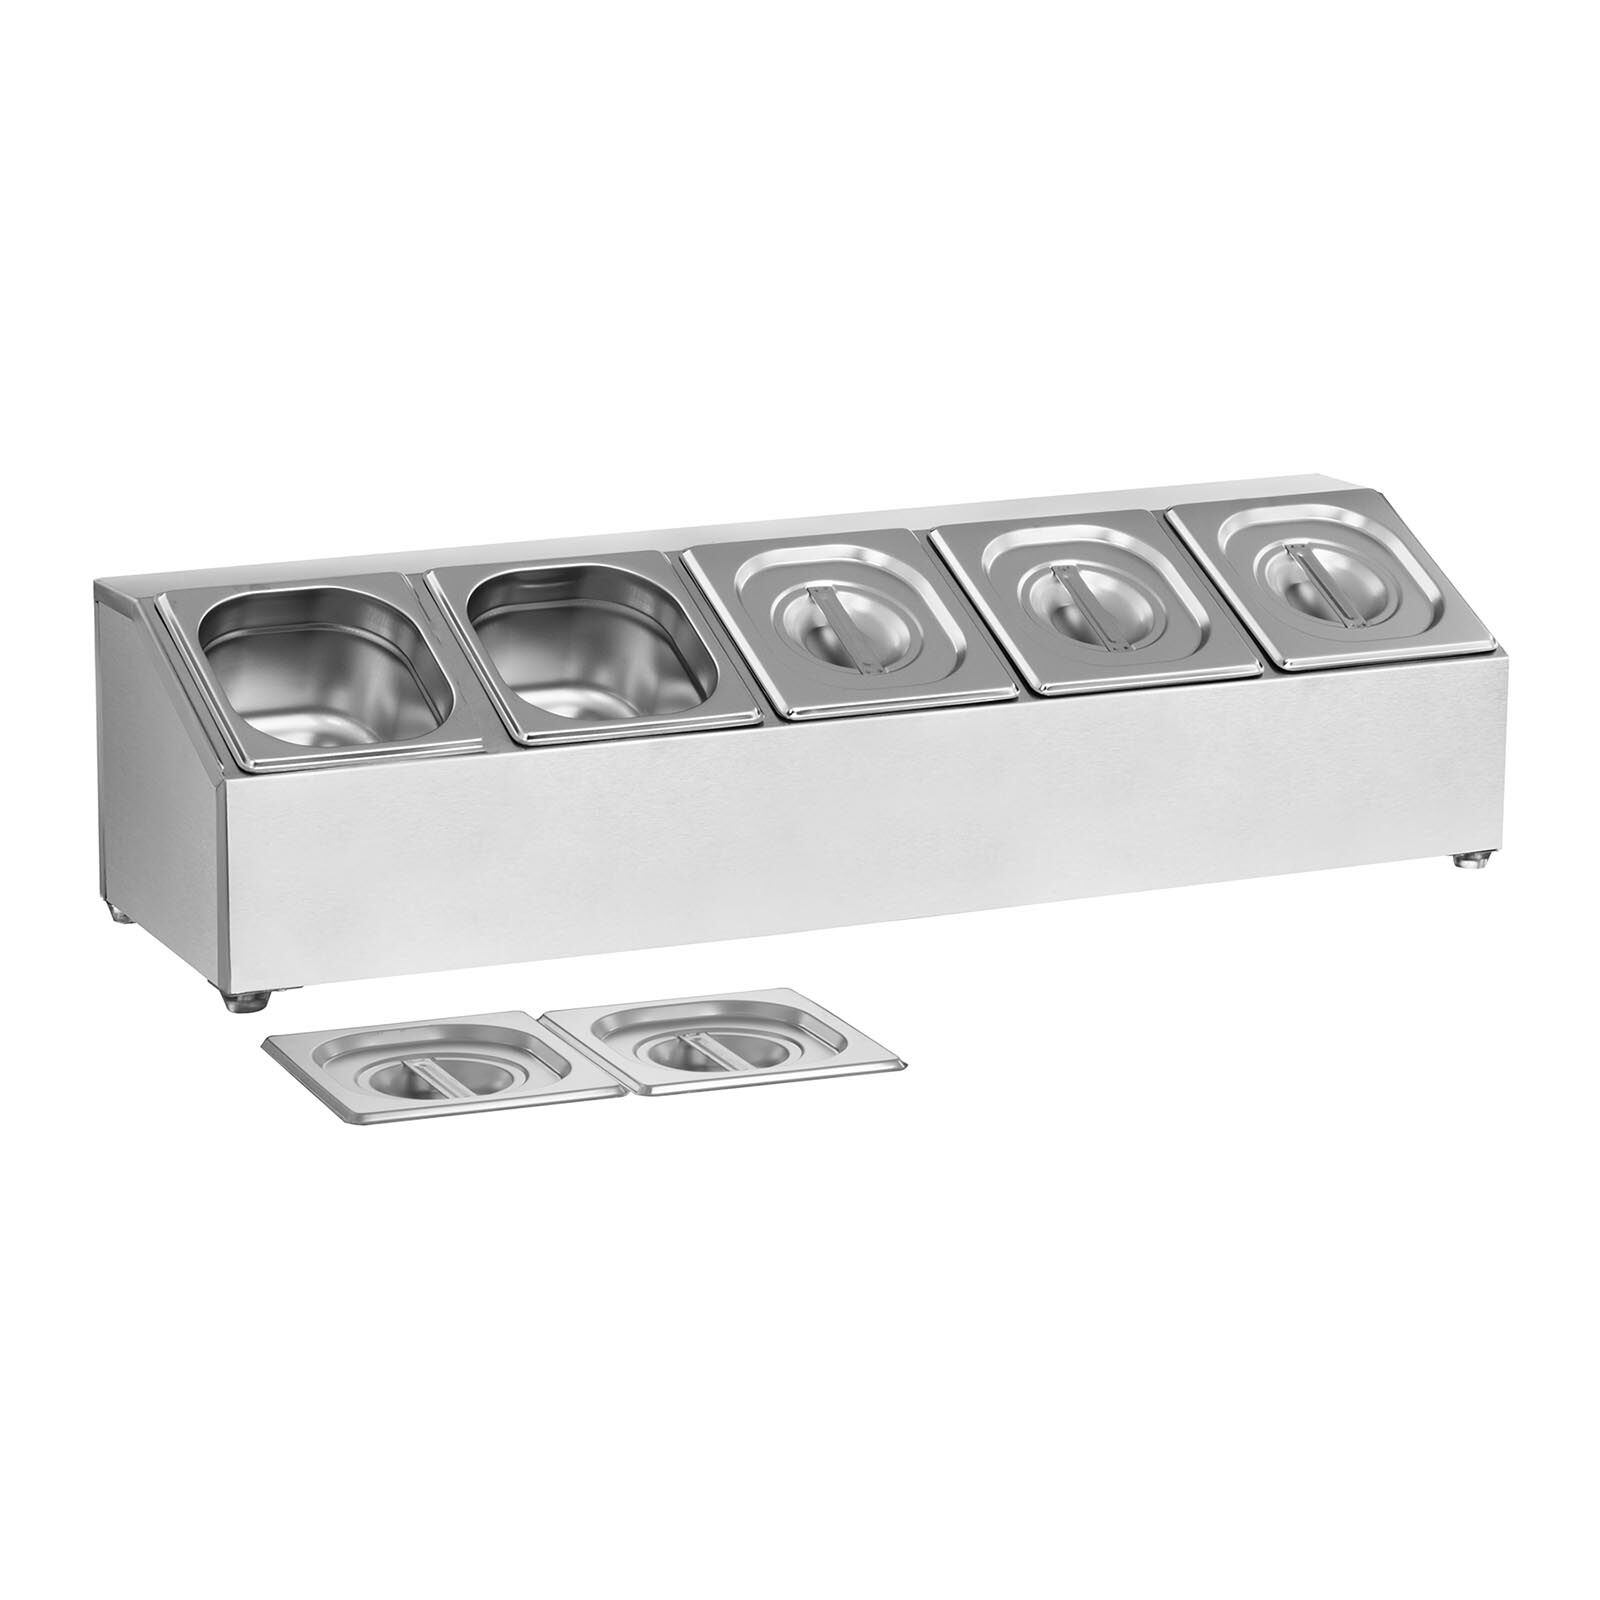 Royal Catering Gastronorm Pan Holder - Incl. 5 GN 1/6 Gastronorm Containers with Lids RCPN 5